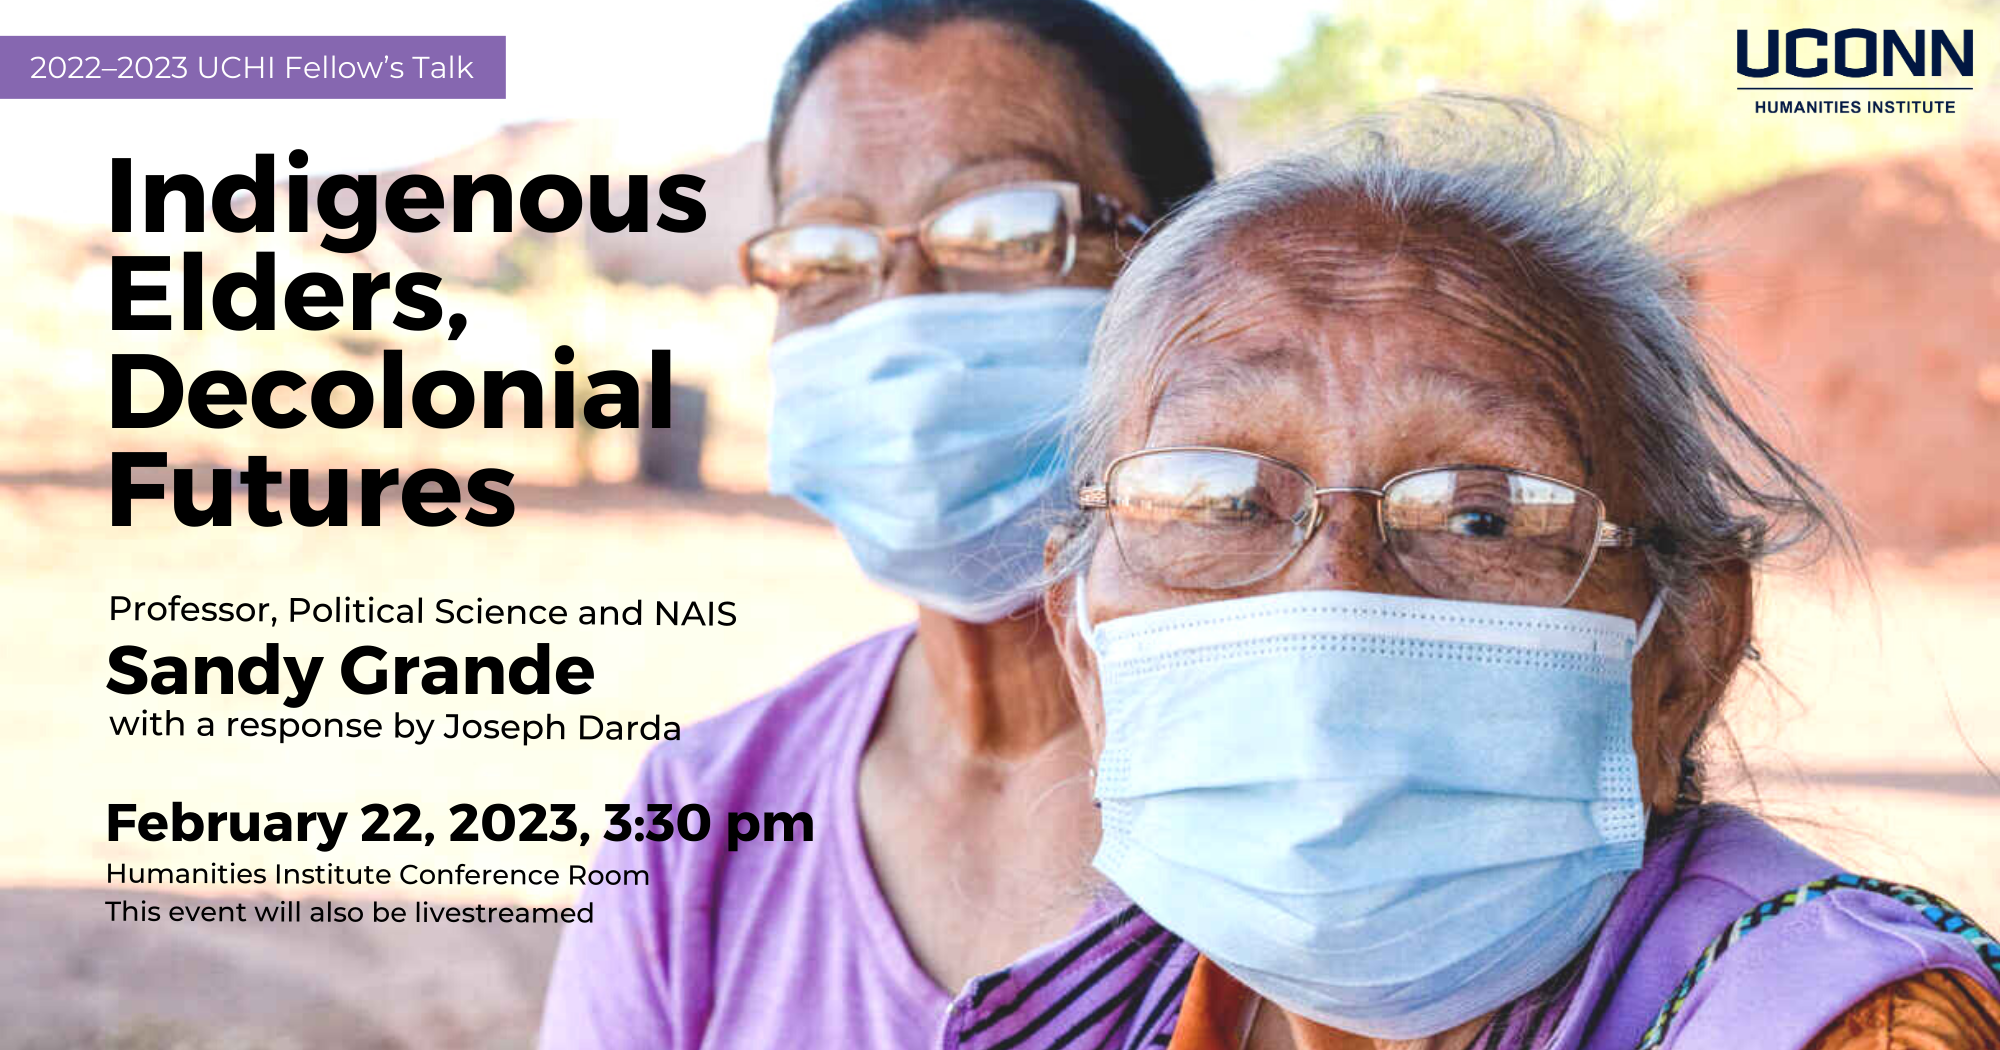 2022-2023 UCHI Fellow's talk. Indigenous Elders, Decolonial Futures. Professor of Political Science and NAIS Sandy Grande, with a response by Joseph Darda. February 22, 2023, 3:30pm. UCHI Conference Room. This event will also be livestreamed.